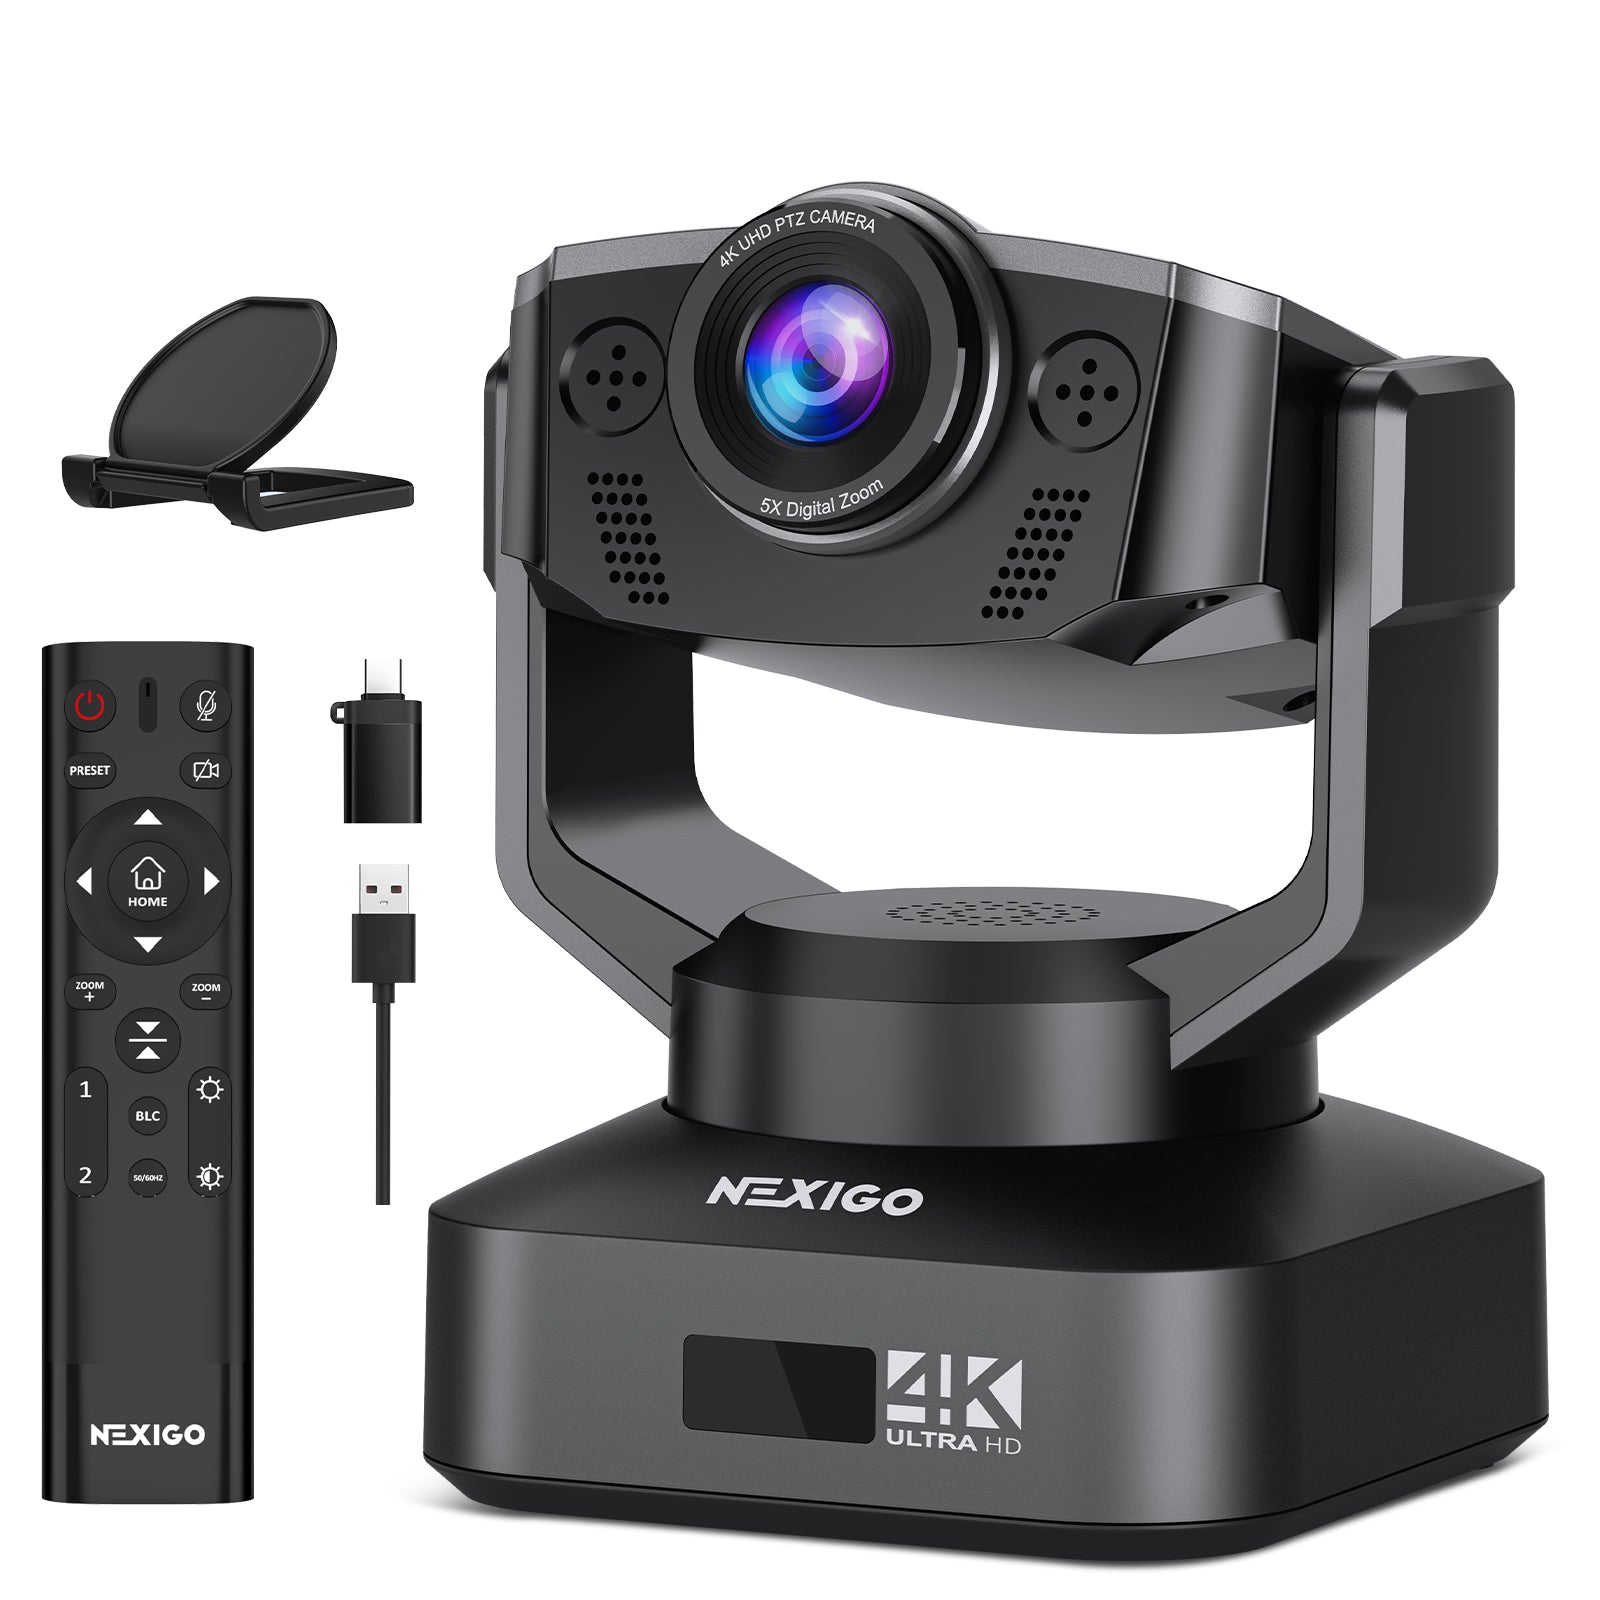 4K PTZ webcam with remote control and 5X digital zoom